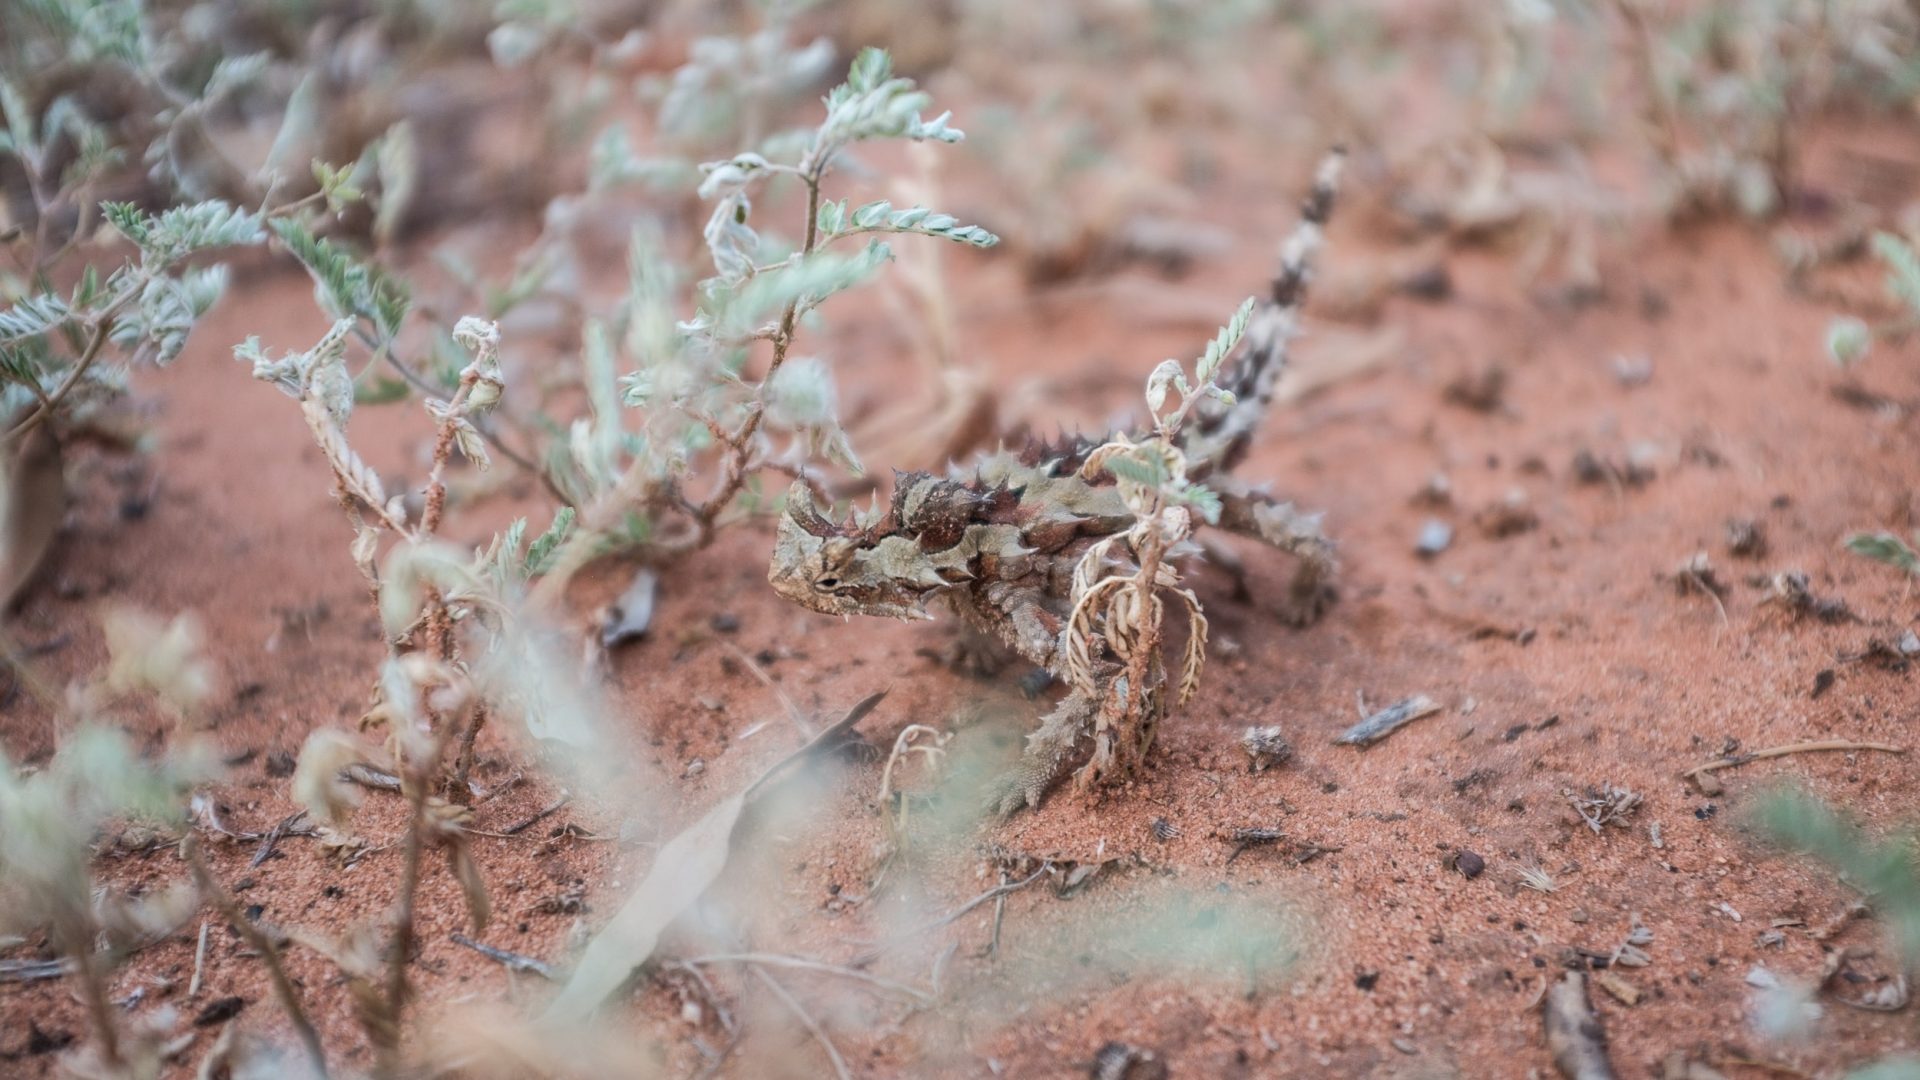 A thorny devil in the Northern Territory.